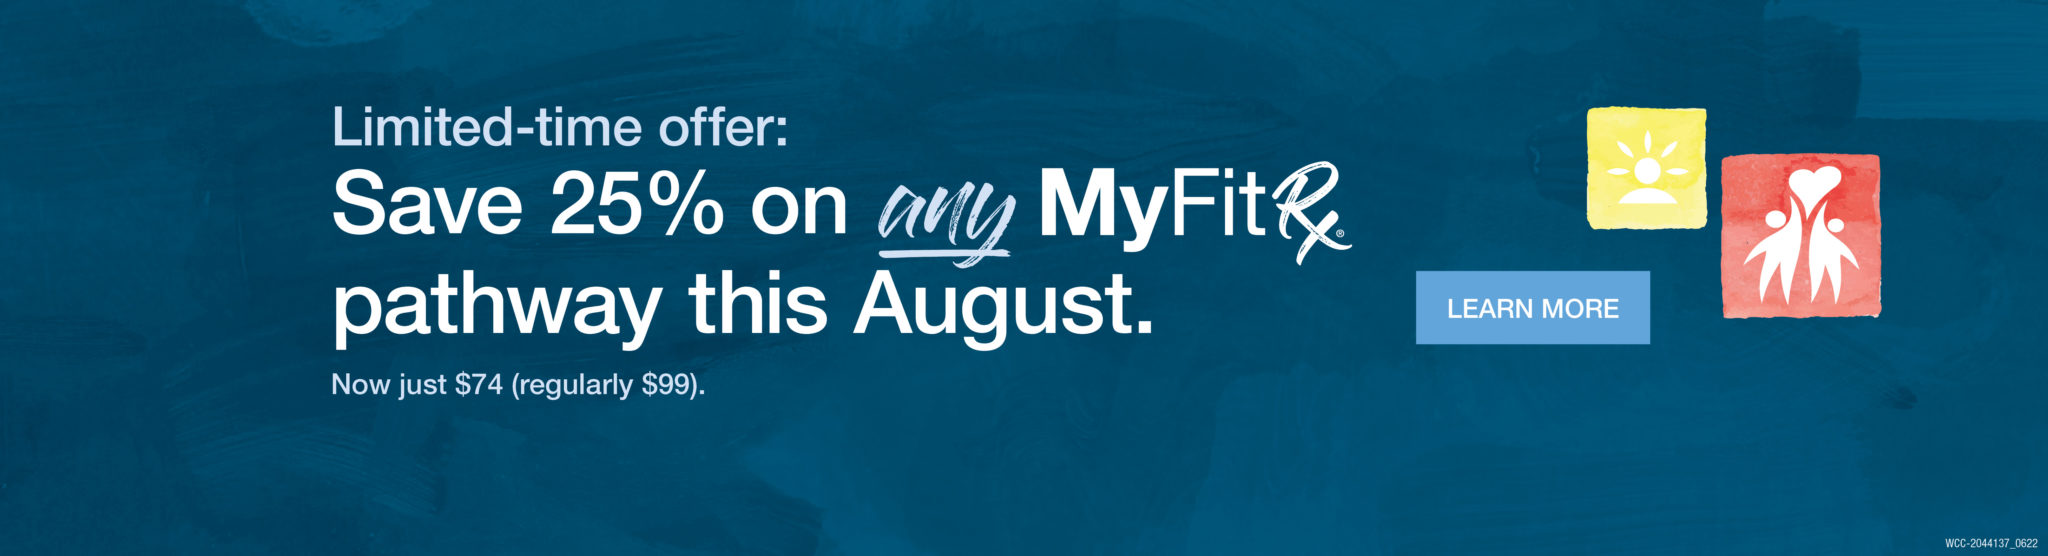 Limited-time offer: Save 25% on any MyFit& pathway this August. Now just $74 (regularly $99),